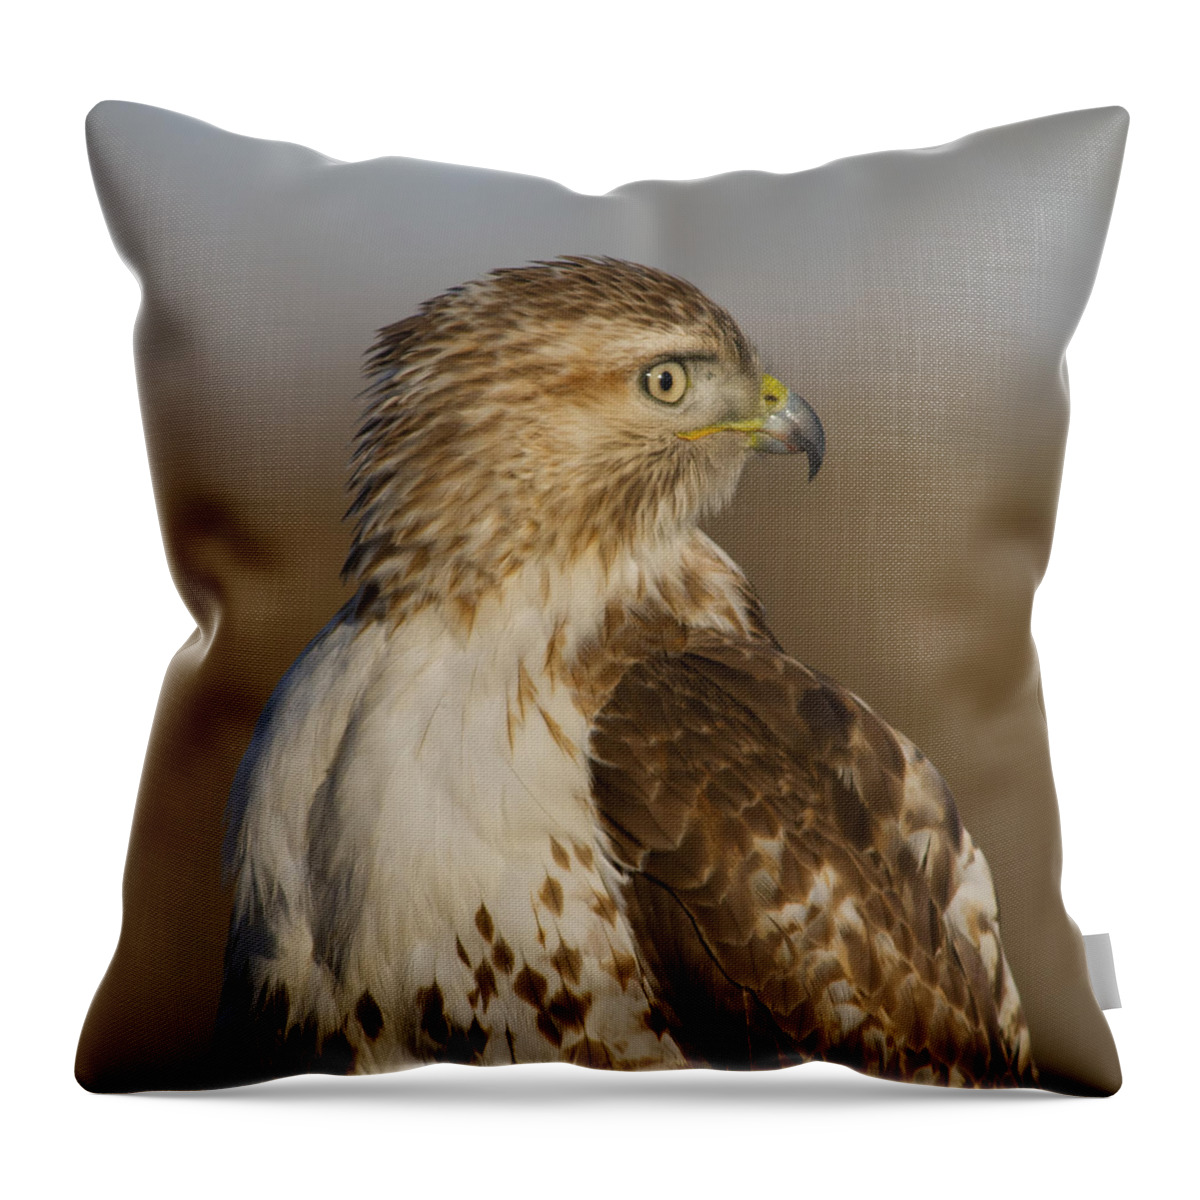 Beak Throw Pillow featuring the photograph Red-tailed Hawk portrait by Larry Bohlin